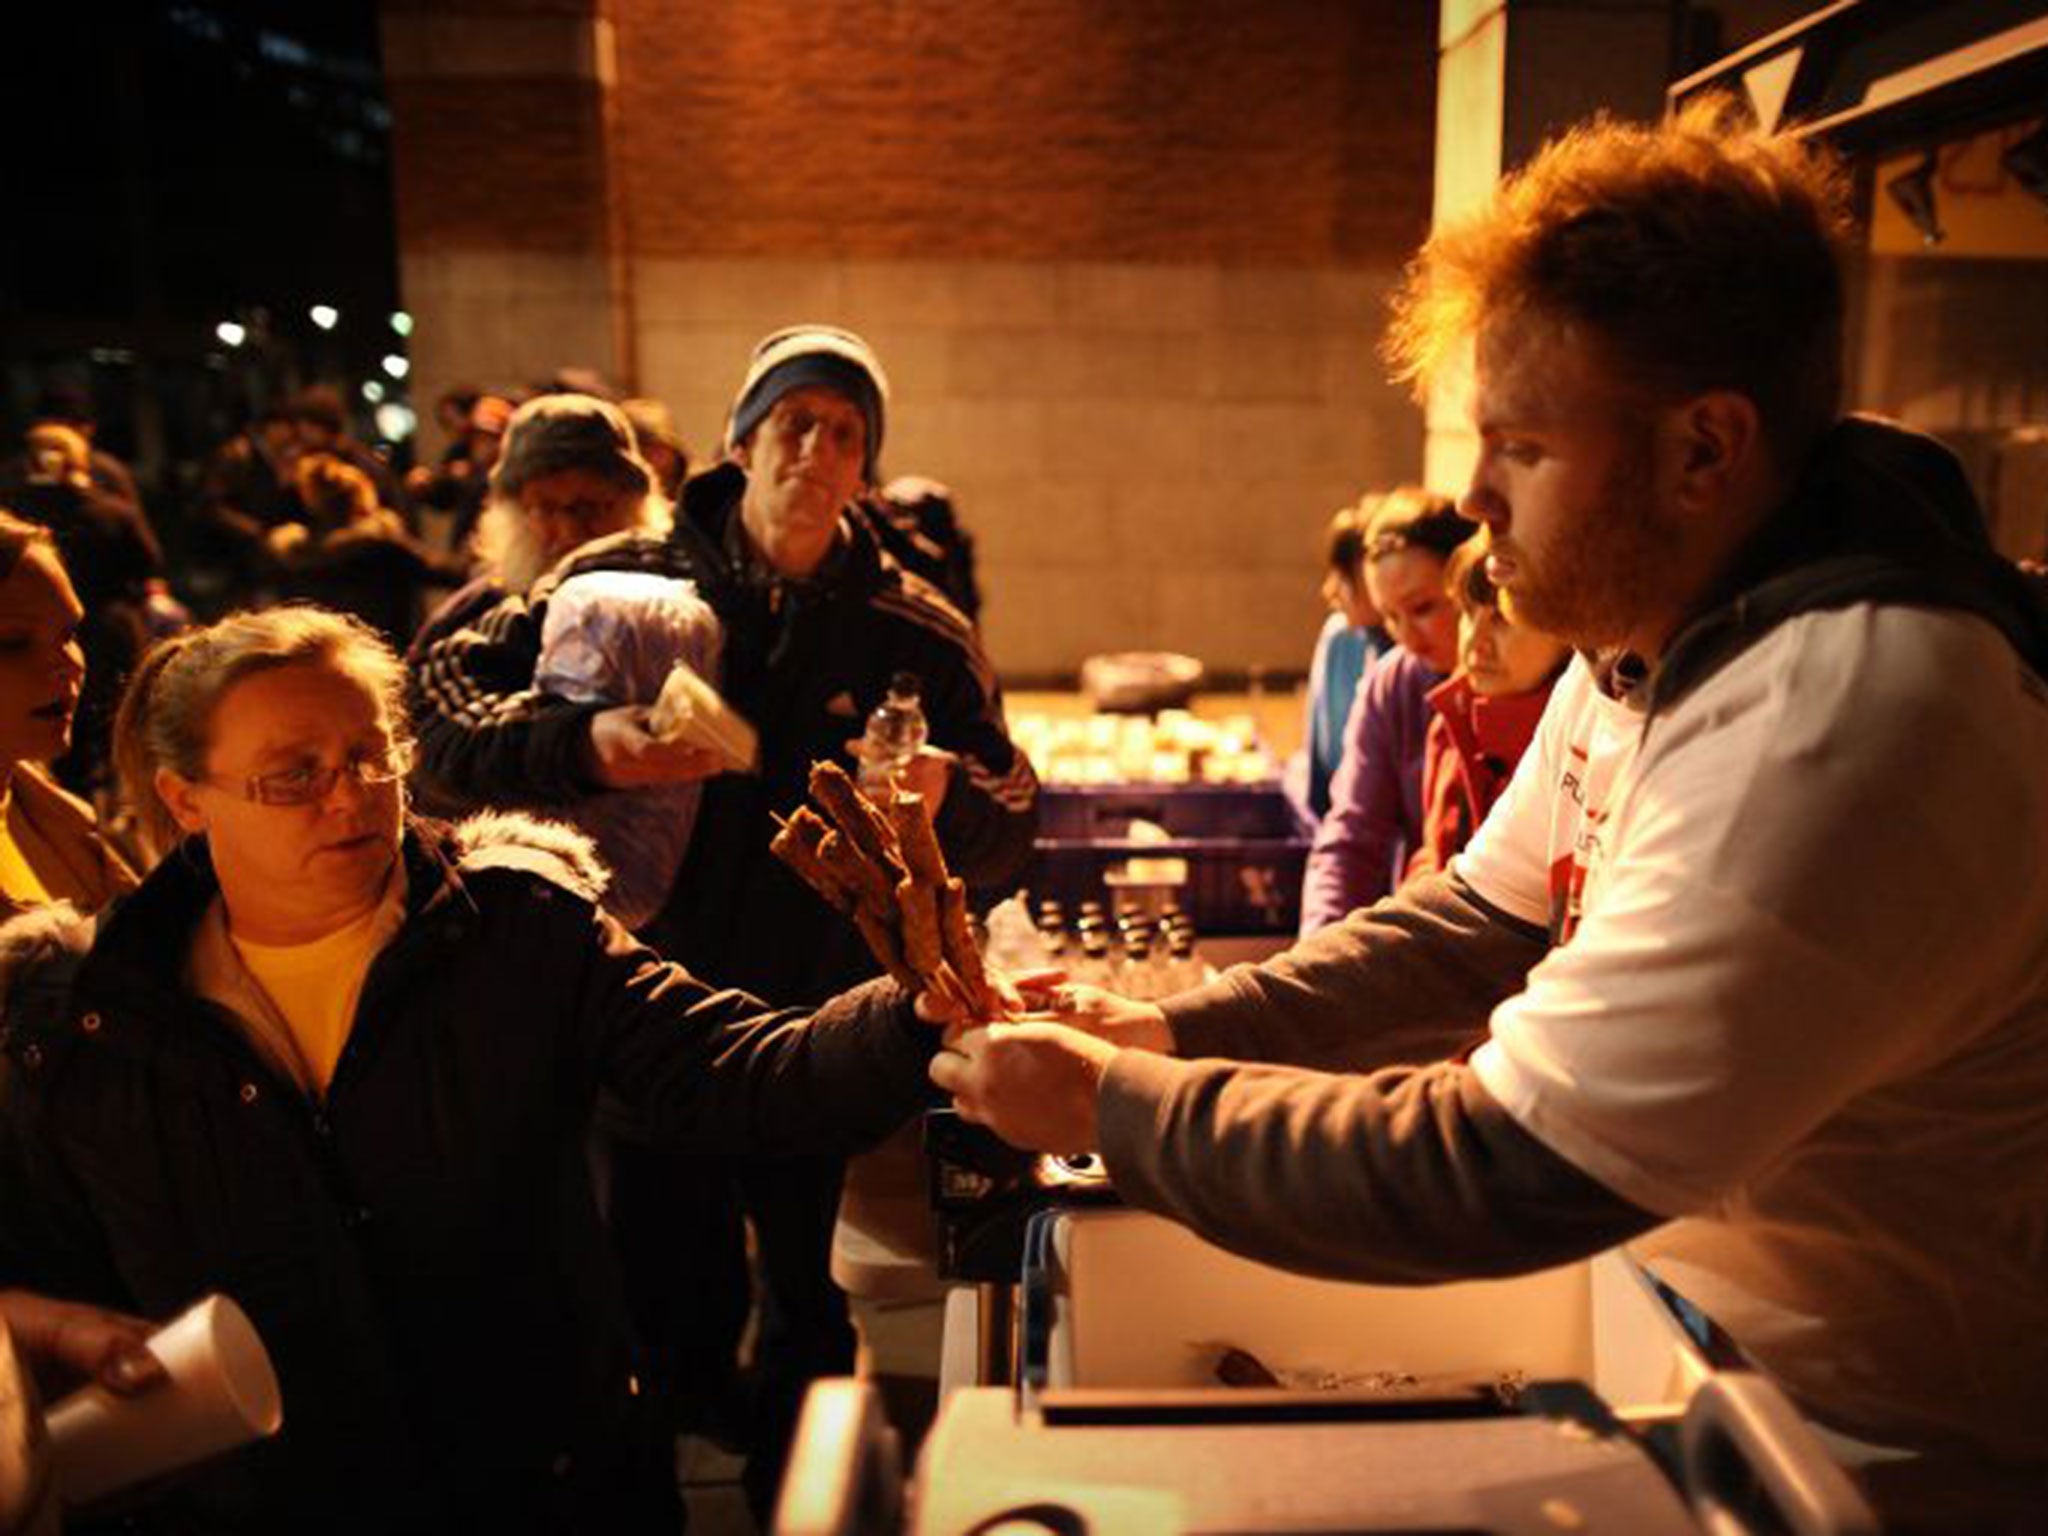 Charity workers distribute food to the homeless next to Westminster Cathedral